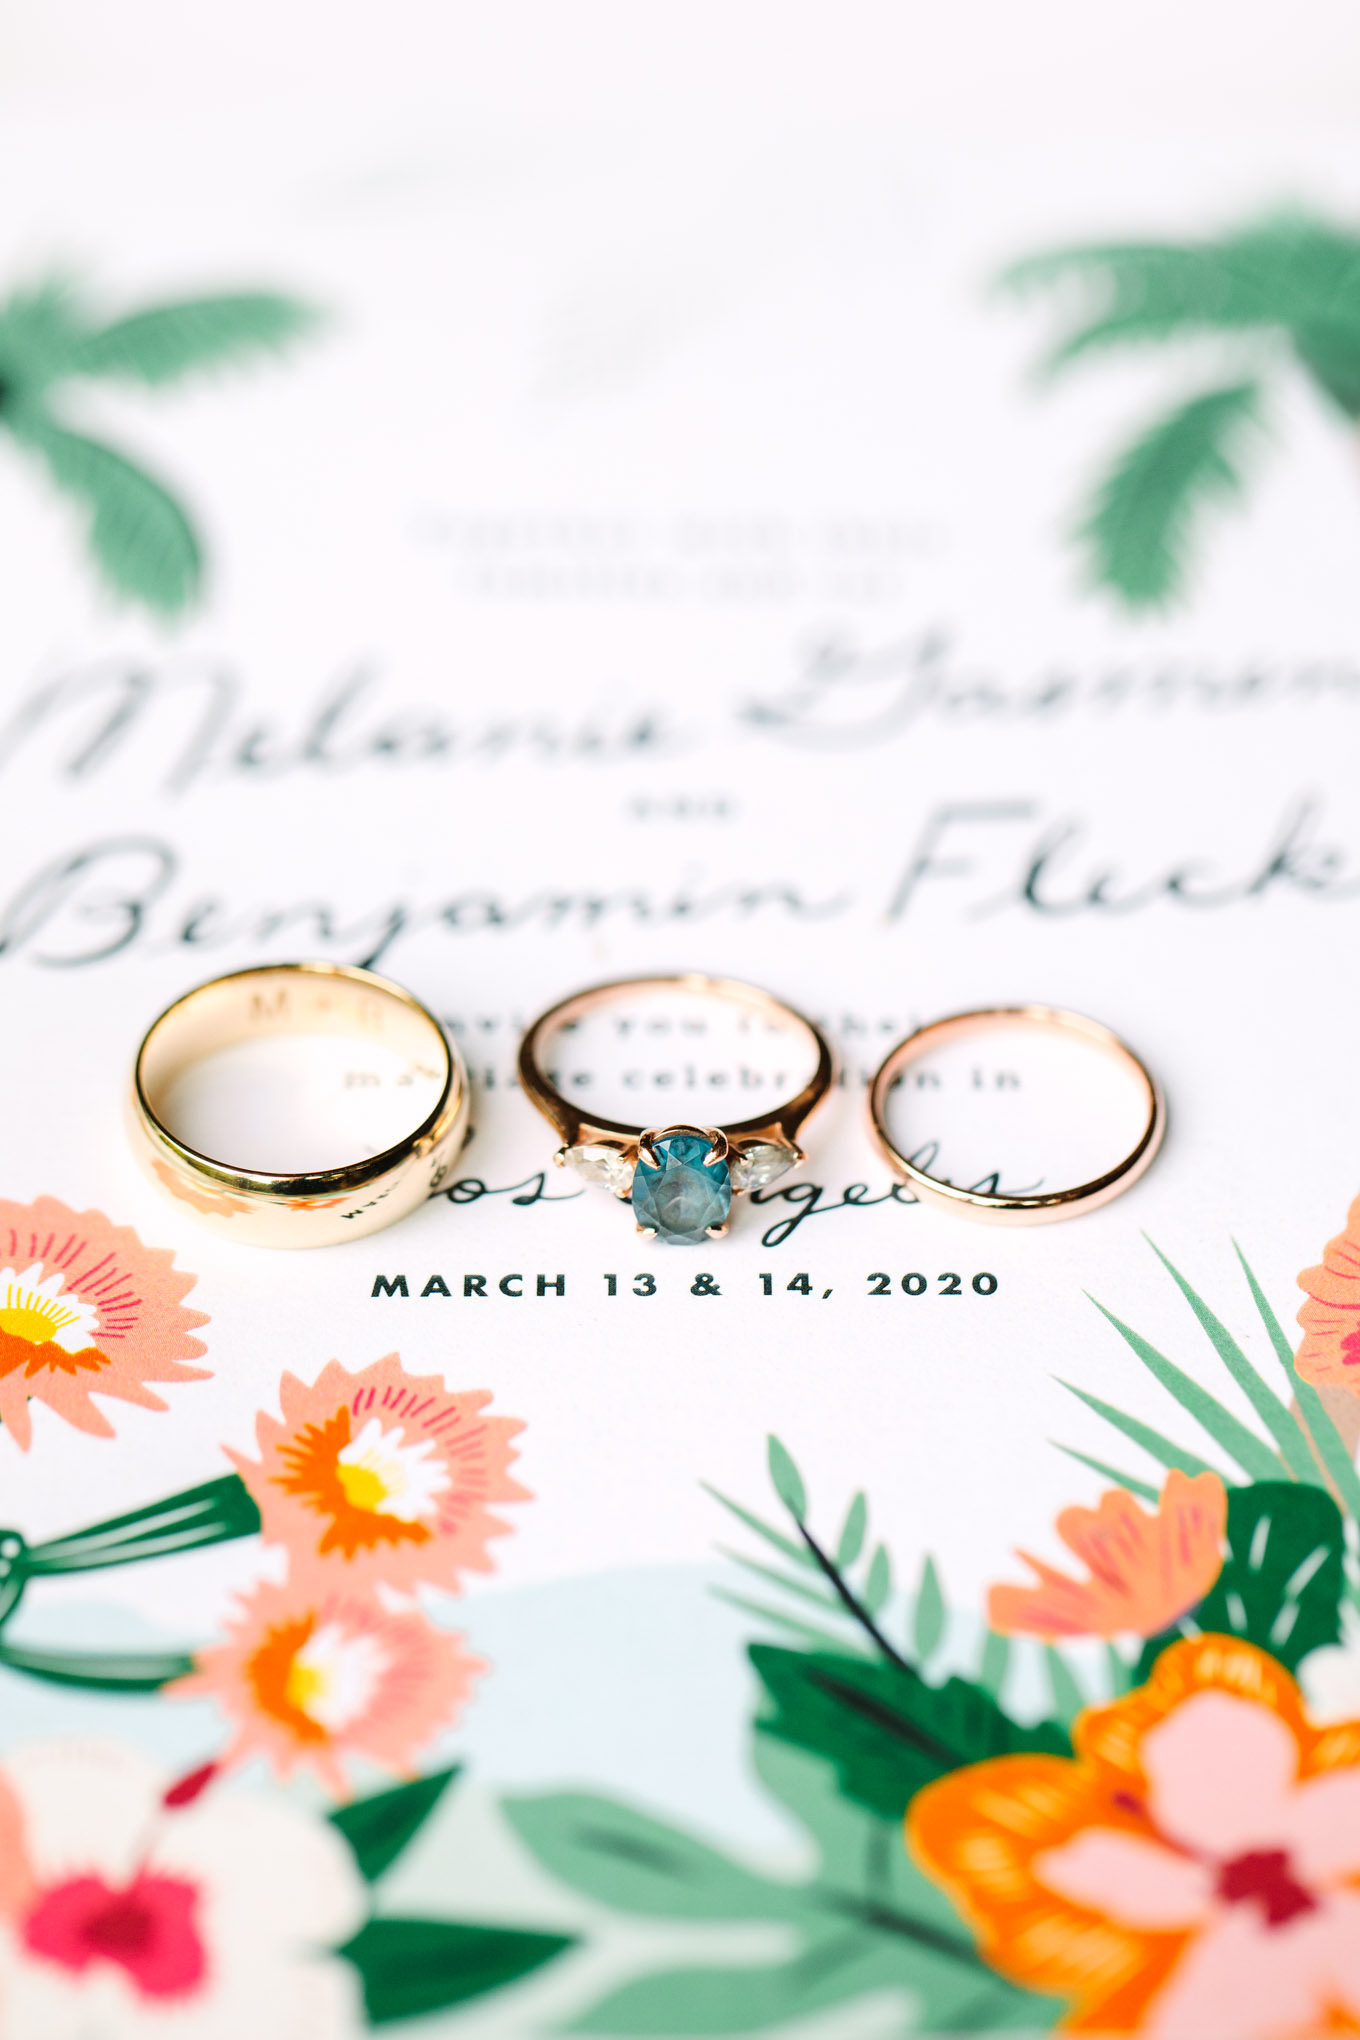 Colorful engagement ring on wedding invitation | TV inspired wedding at The Fig House Los Angeles | Published on The Knot | Fresh and colorful photography for fun-loving couples in Southern California | #losangeleswedding #TVwedding #colorfulwedding #theknot   Source: Mary Costa Photography | Los Angeles wedding photographer